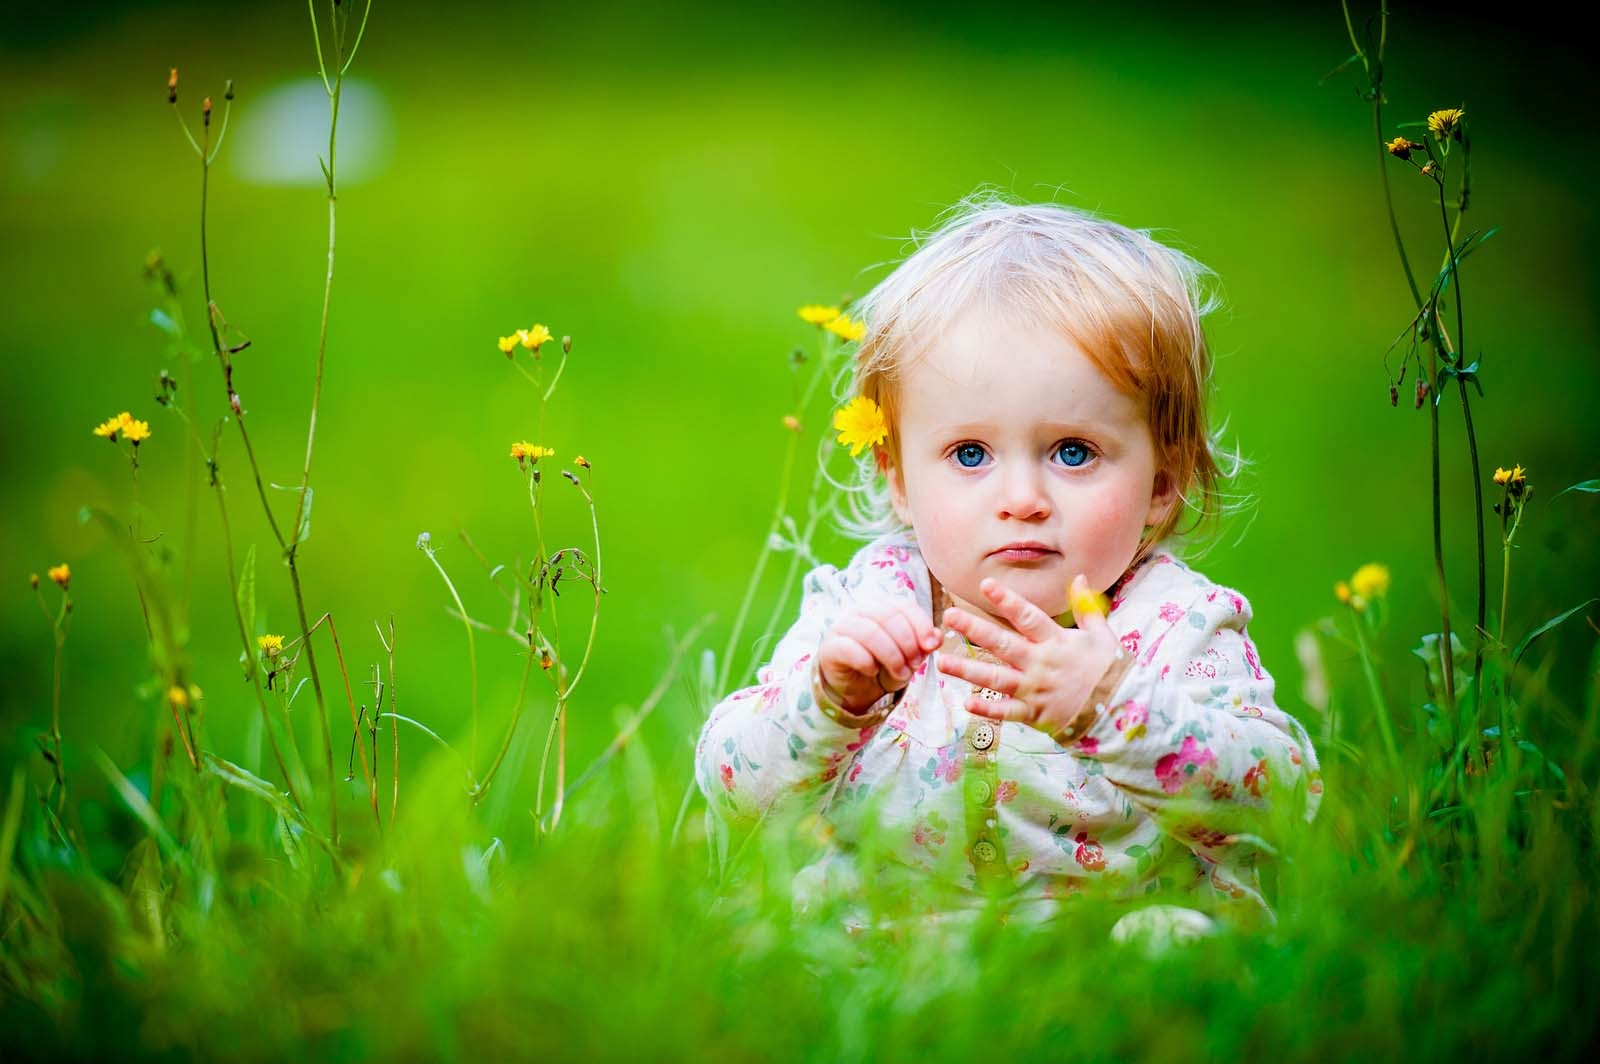 Cute And Lovely Baby Pictures Free Download - HD Wallpaper 